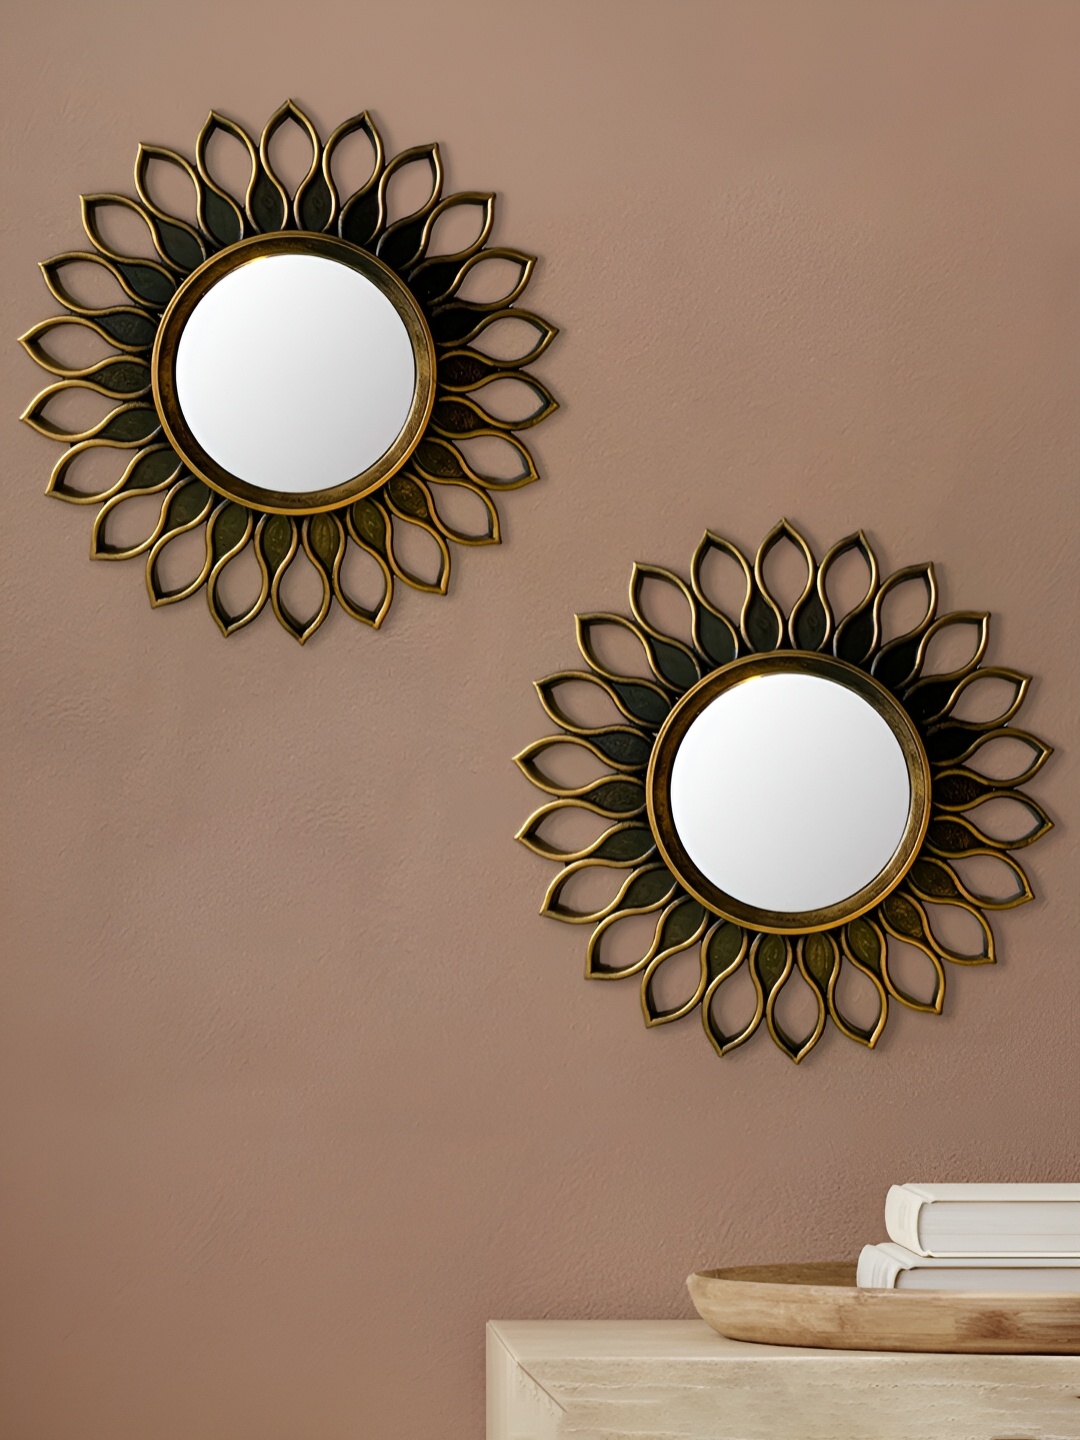 

Art Street White & Beige 2 Pieces Patterned Sunflower Shaped Wall Mirrors